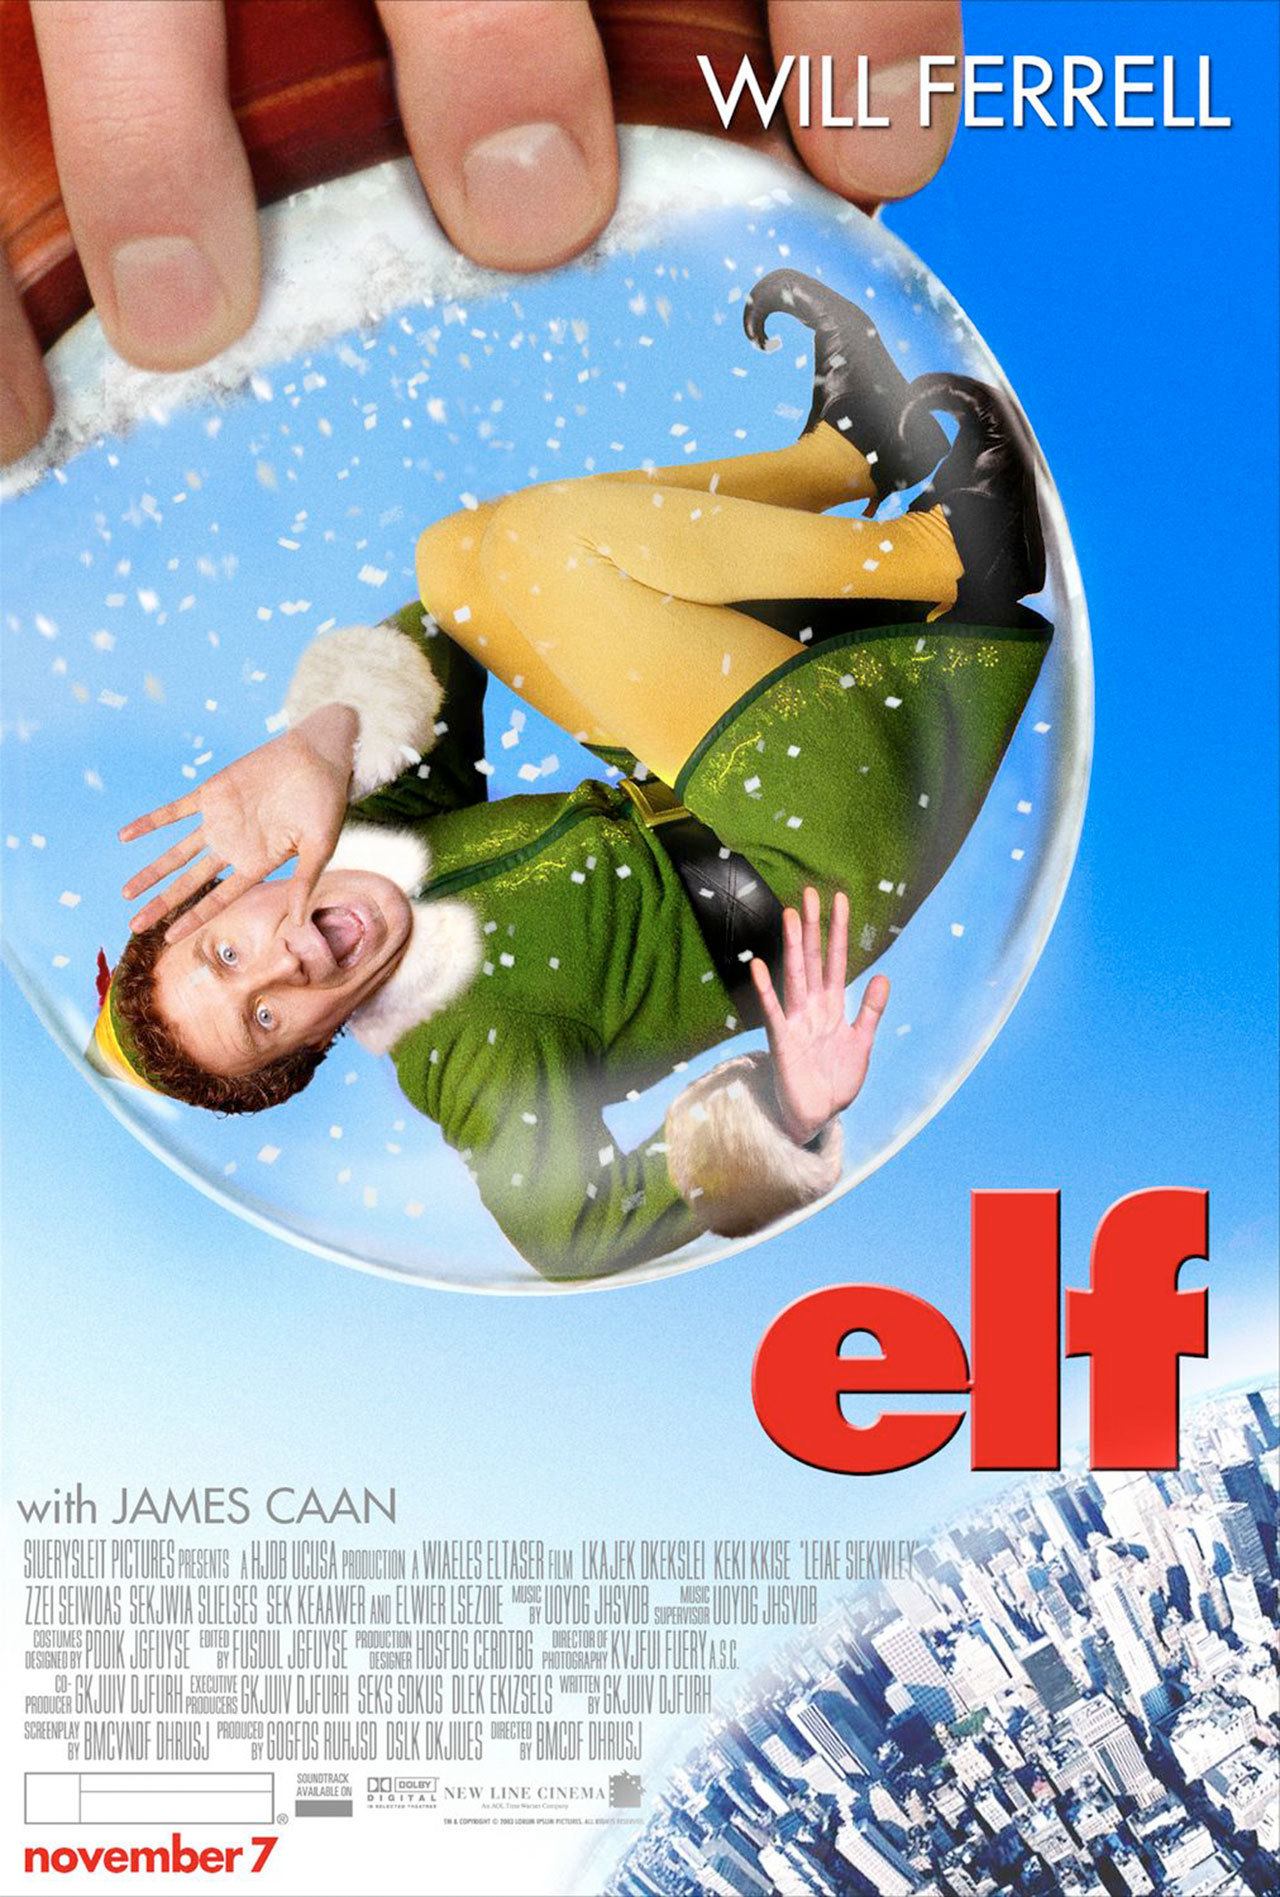 Image courtesy of New Line Cinema                                “Elf” (2003) and four other holiday favorites are set for a yuletide revival at the Bainbridge Island Museum of Art this year, bringing you season’s greetings from the silver screen as part of the latest smARTfilm series: “Hollywood Holidays.”